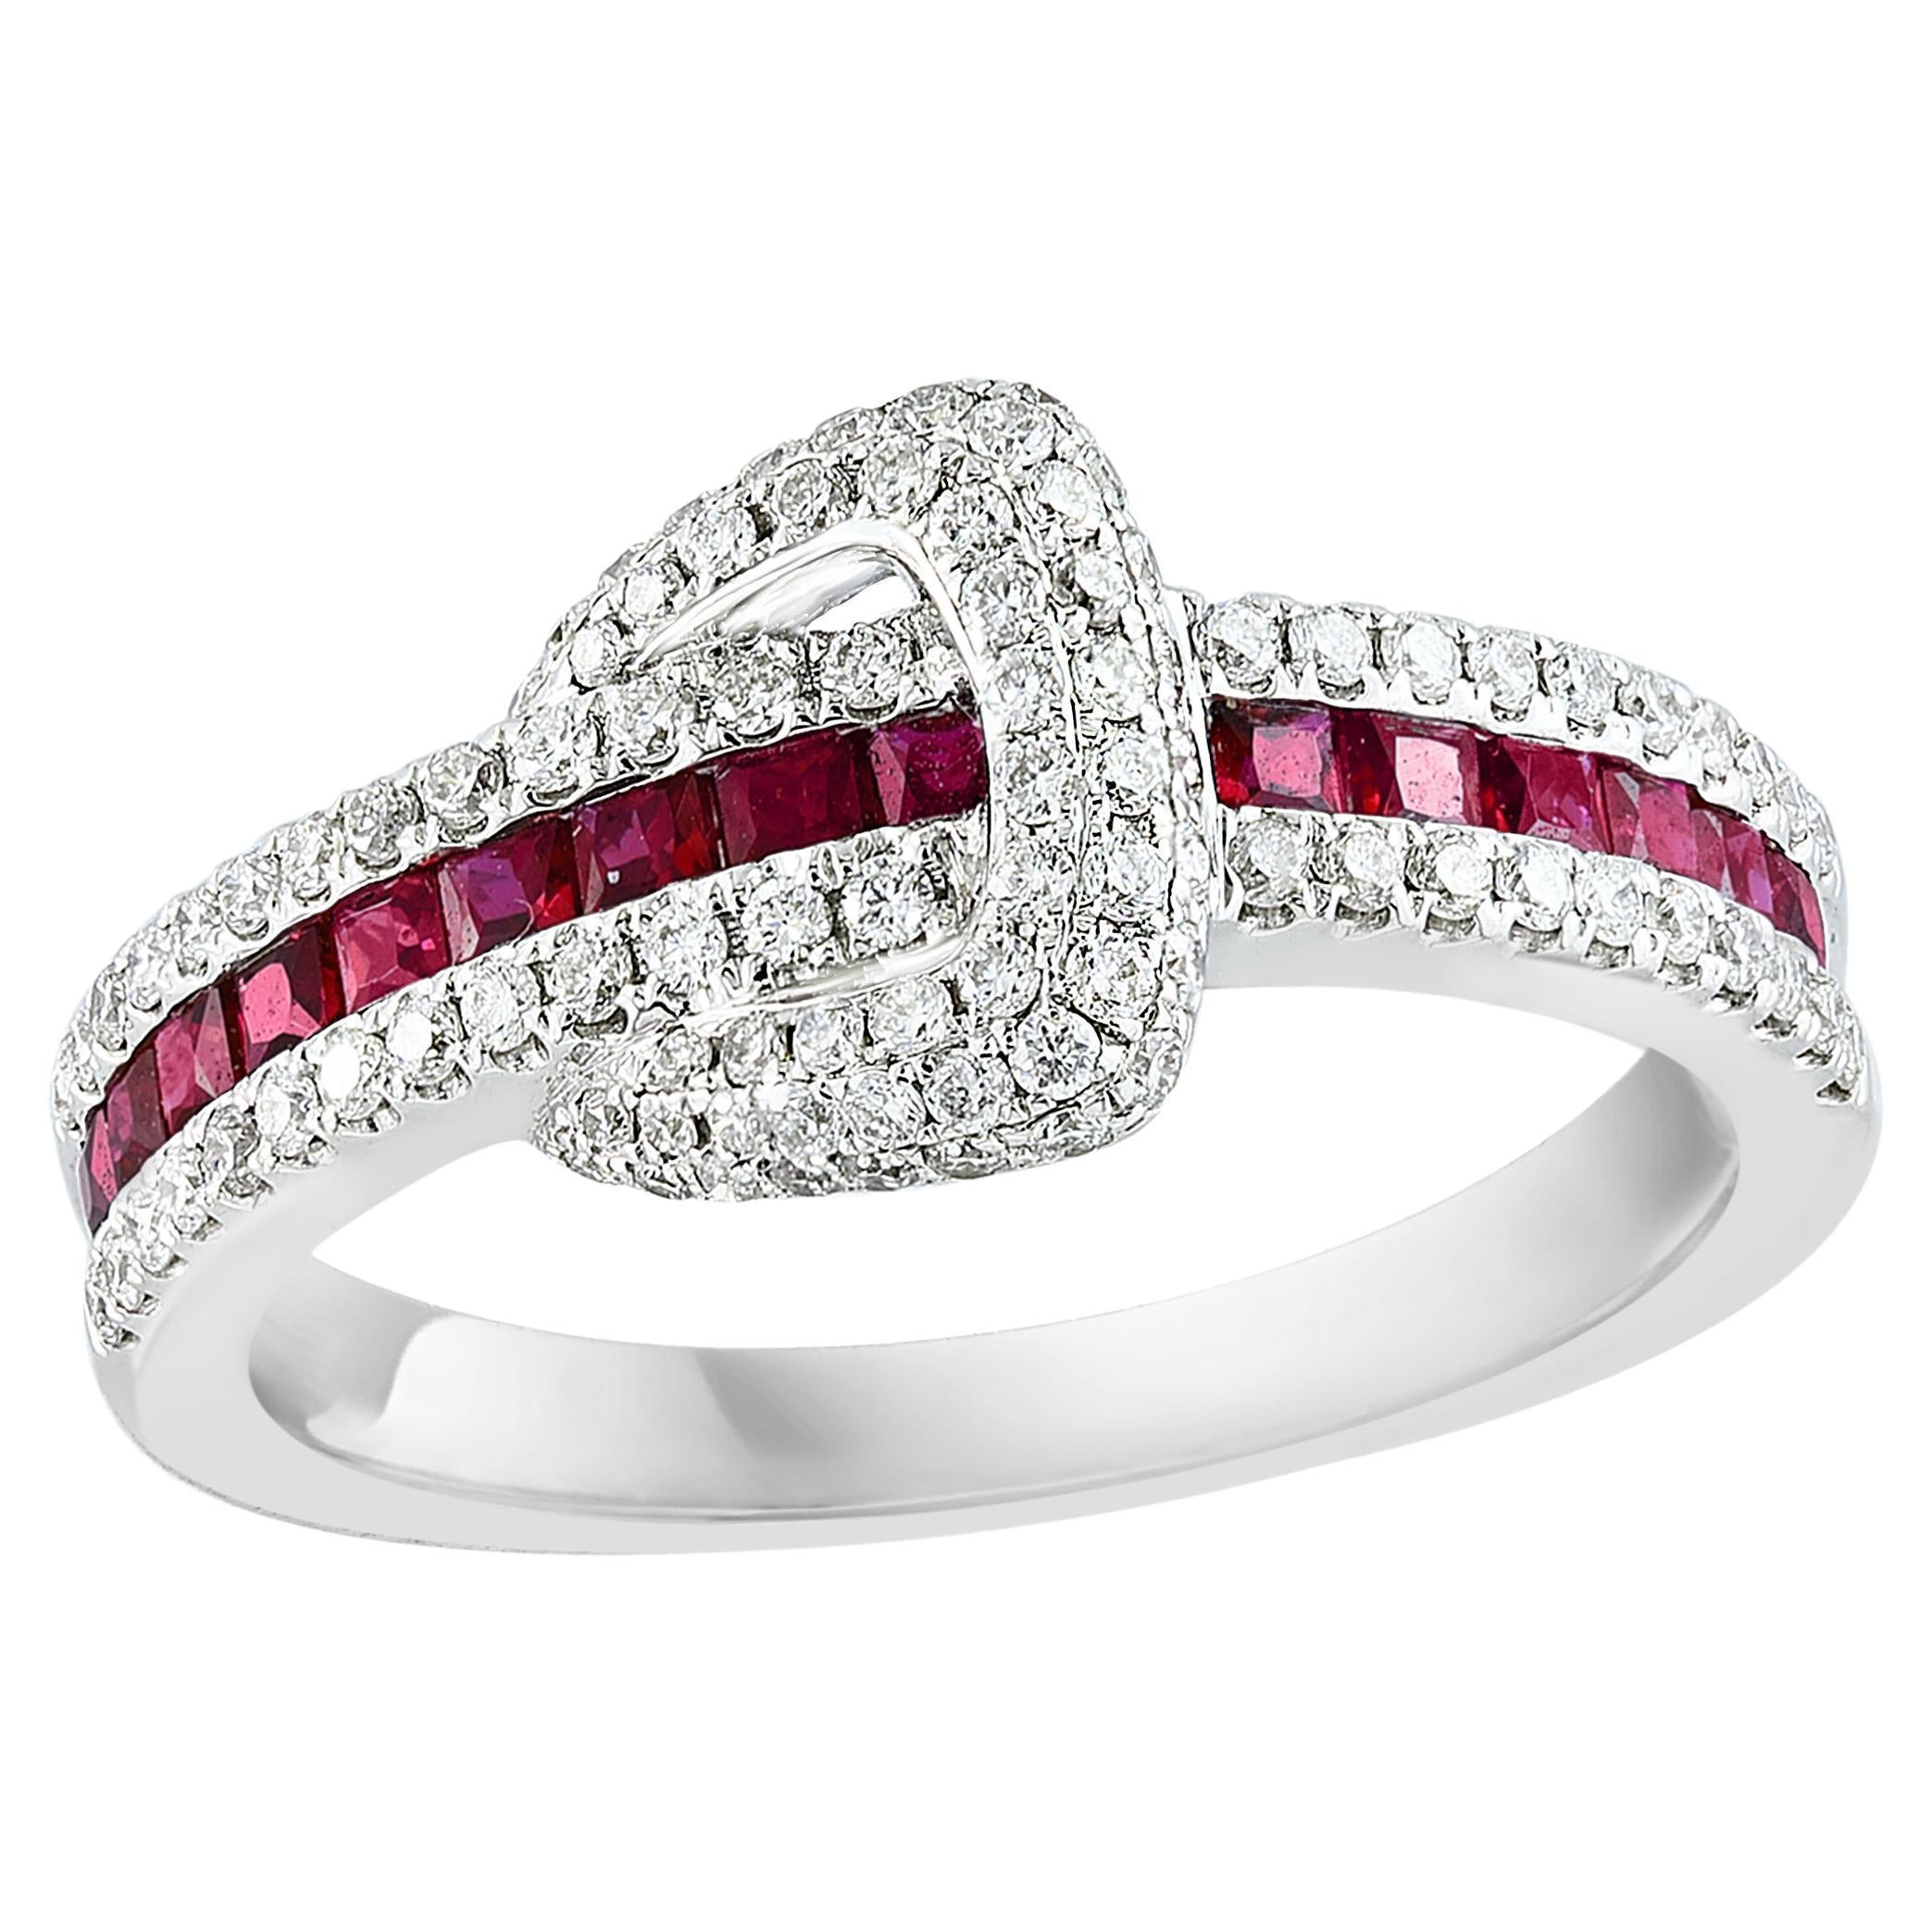 0.57 Carat Princess Cut Ruby and Diamond Band in 18K White Gold For Sale